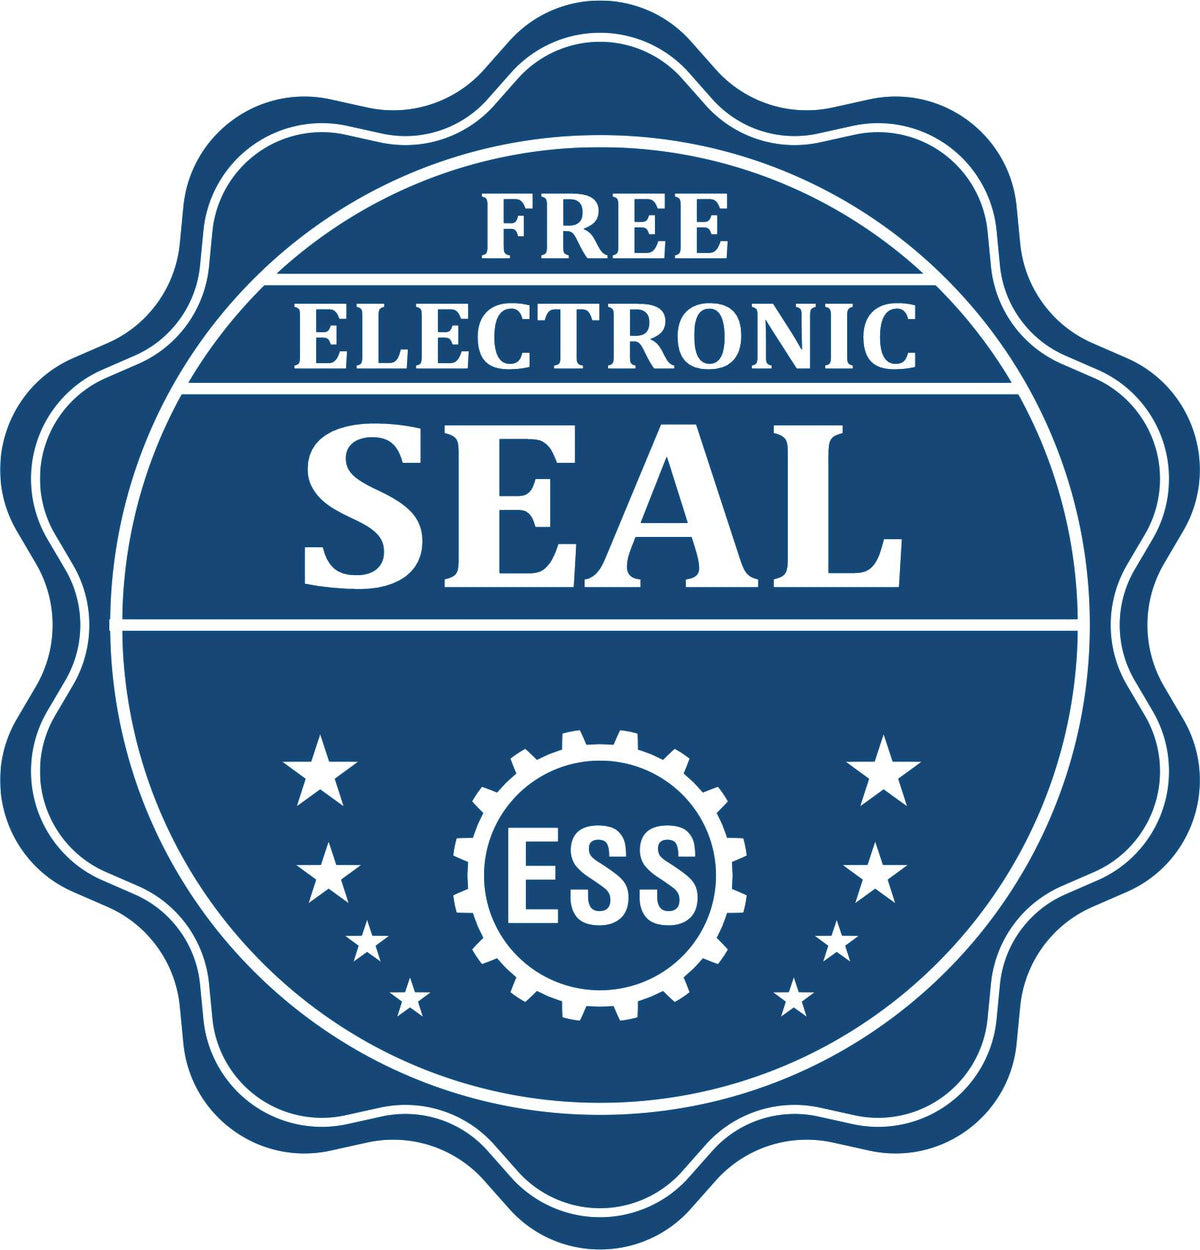 A badge showing a free electronic seal for the Wooden Handle New Hampshire State Seal Notary Public Stamp with stars and the ESS gear on the emblem.